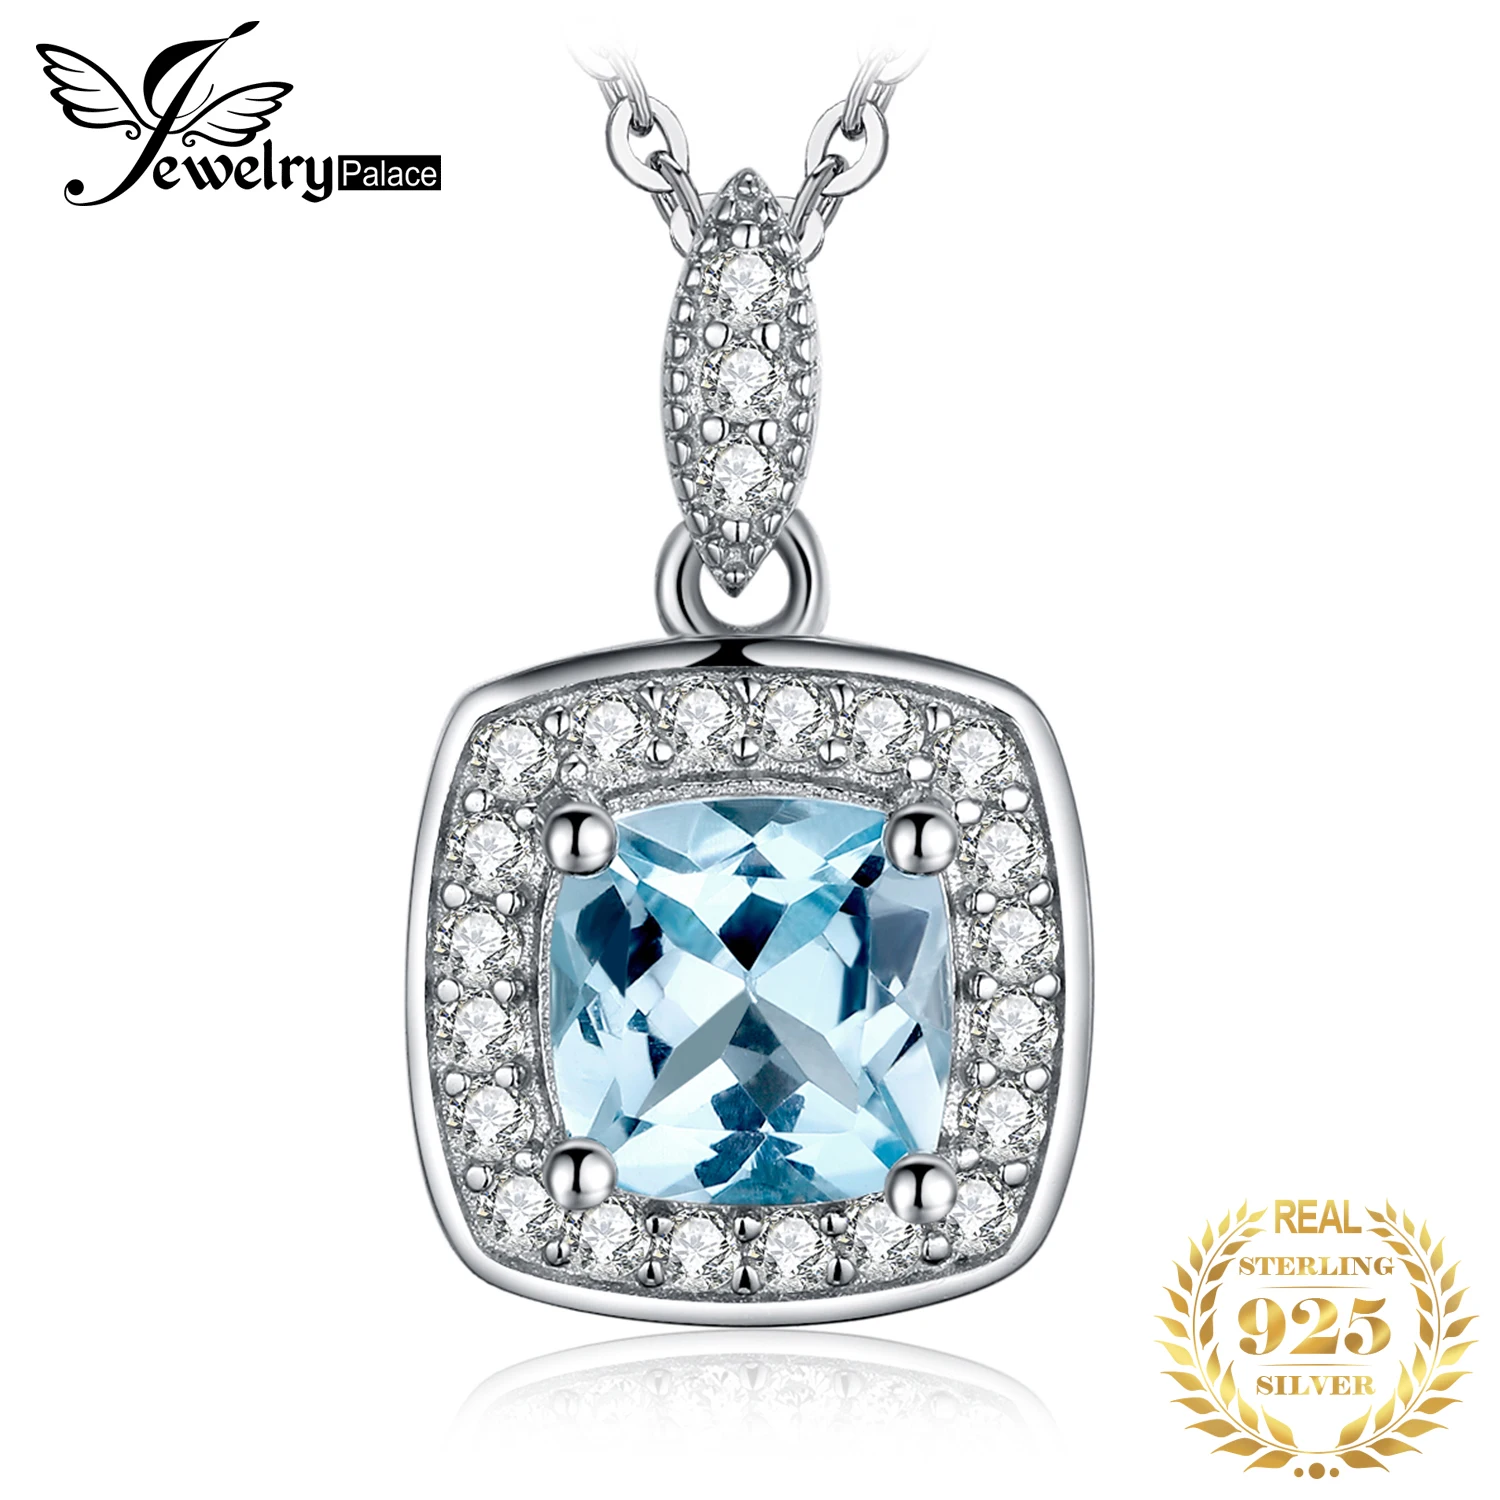 

JewelryPalace Natural Blue Topaz Pendant Necklace 925 Sterling Silver Gemstones Choker Statement Necklace Women No Chain